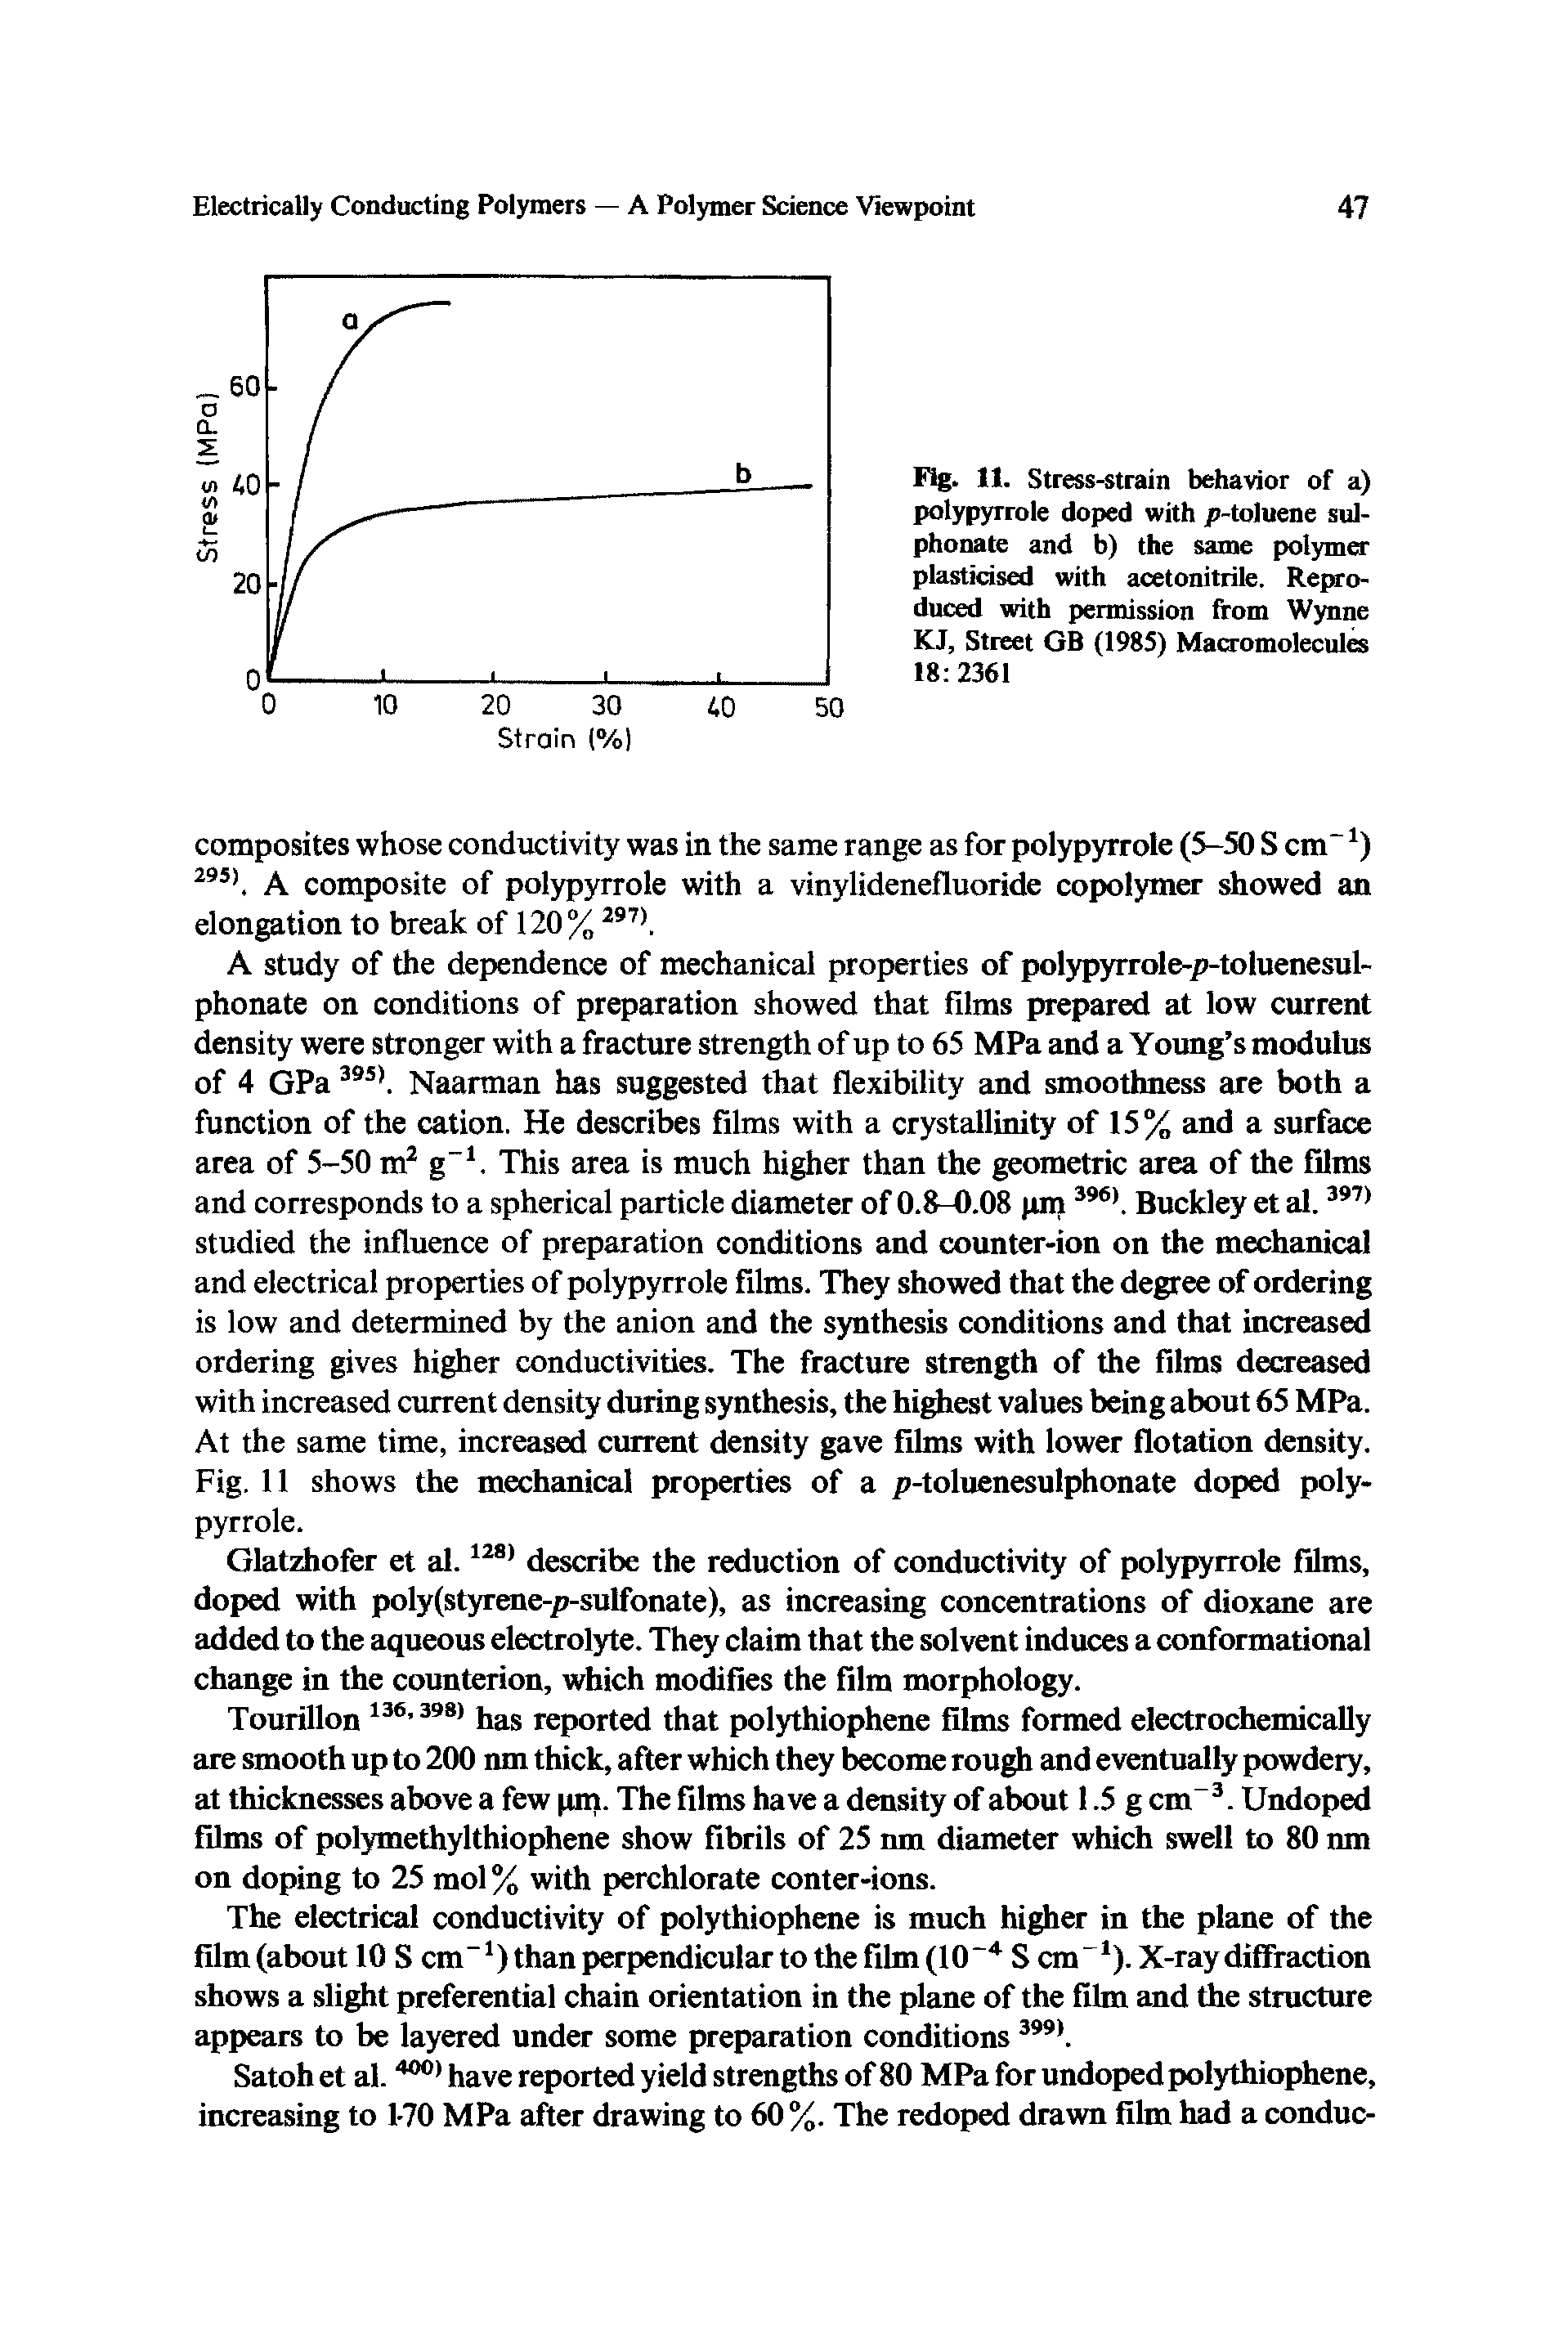 Fig. 11. Stress-strain behavior of a) polypyrrole doped with p-toluene sul-phonate and b) the same polymer plasticised with acetonitrile. Reproduced with permission from Wynne KJ, Street GB (1985) Macromolecules 18 2361...